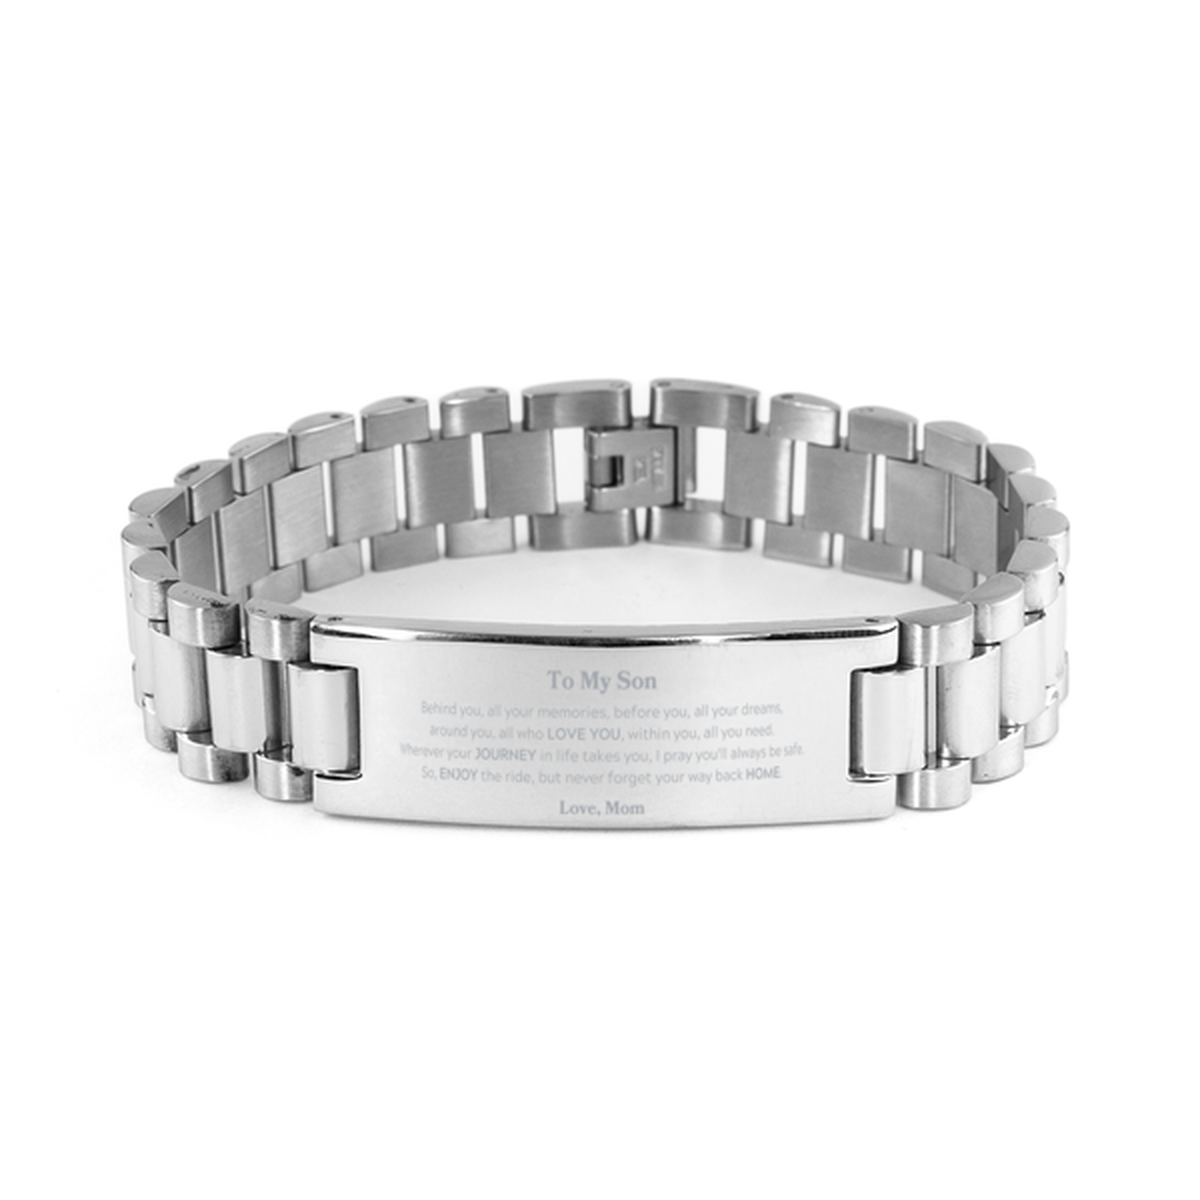 To My Son Graduation Gifts from Mom, Son Ladder Stainless Steel Bracelet Christmas Birthday Gifts for Son Behind you, all your memories, before you, all your dreams. Love, Mom